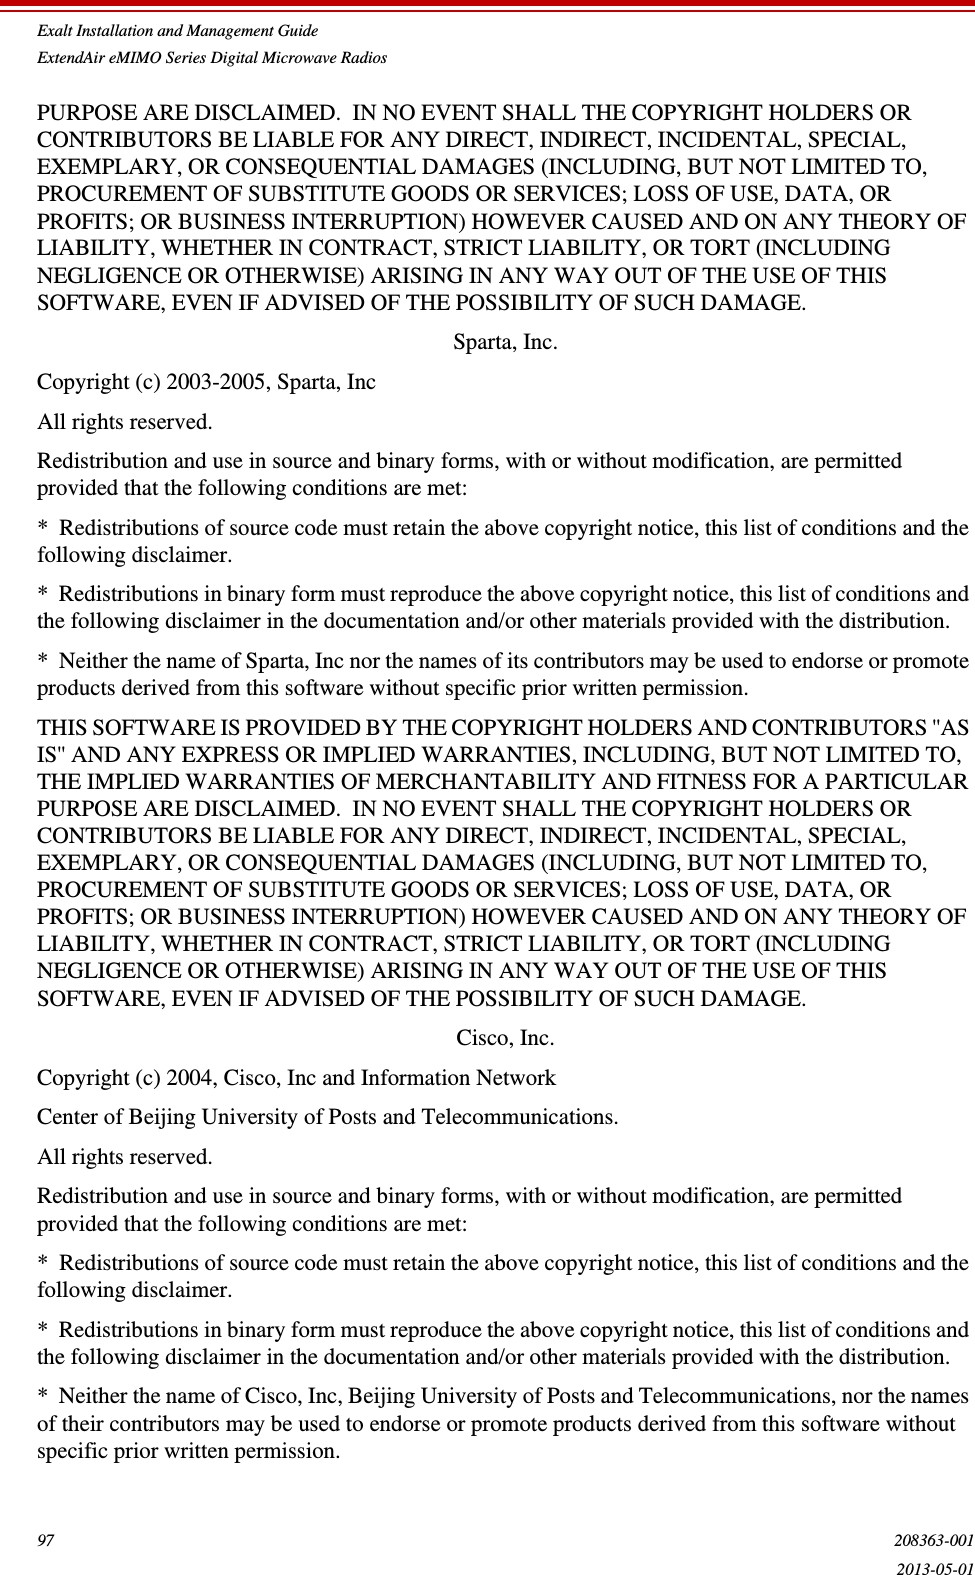 Exalt Installation and Management GuideExtendAir eMIMO Series Digital Microwave Radios97 208363-0012013-05-01PURPOSE ARE DISCLAIMED.  IN NO EVENT SHALL THE COPYRIGHT HOLDERS OR CONTRIBUTORS BE LIABLE FOR ANY DIRECT, INDIRECT, INCIDENTAL, SPECIAL, EXEMPLARY, OR CONSEQUENTIAL DAMAGES (INCLUDING, BUT NOT LIMITED TO, PROCUREMENT OF SUBSTITUTE GOODS OR SERVICES; LOSS OF USE, DATA, OR PROFITS; OR BUSINESS INTERRUPTION) HOWEVER CAUSED AND ON ANY THEORY OF LIABILITY, WHETHER IN CONTRACT, STRICT LIABILITY, OR TORT (INCLUDING NEGLIGENCE OR OTHERWISE) ARISING IN ANY WAY OUT OF THE USE OF THIS SOFTWARE, EVEN IF ADVISED OF THE POSSIBILITY OF SUCH DAMAGE.Sparta, Inc.Copyright (c) 2003-2005, Sparta, IncAll rights reserved.Redistribution and use in source and binary forms, with or without modification, are permitted provided that the following conditions are met:*  Redistributions of source code must retain the above copyright notice, this list of conditions and the following disclaimer.*  Redistributions in binary form must reproduce the above copyright notice, this list of conditions and the following disclaimer in the documentation and/or other materials provided with the distribution.*  Neither the name of Sparta, Inc nor the names of its contributors may be used to endorse or promote products derived from this software without specific prior written permission.THIS SOFTWARE IS PROVIDED BY THE COPYRIGHT HOLDERS AND CONTRIBUTORS &apos;&apos;AS IS&apos;&apos; AND ANY EXPRESS OR IMPLIED WARRANTIES, INCLUDING, BUT NOT LIMITED TO, THE IMPLIED WARRANTIES OF MERCHANTABILITY AND FITNESS FOR A PARTICULAR PURPOSE ARE DISCLAIMED.  IN NO EVENT SHALL THE COPYRIGHT HOLDERS OR CONTRIBUTORS BE LIABLE FOR ANY DIRECT, INDIRECT, INCIDENTAL, SPECIAL, EXEMPLARY, OR CONSEQUENTIAL DAMAGES (INCLUDING, BUT NOT LIMITED TO, PROCUREMENT OF SUBSTITUTE GOODS OR SERVICES; LOSS OF USE, DATA, OR PROFITS; OR BUSINESS INTERRUPTION) HOWEVER CAUSED AND ON ANY THEORY OF LIABILITY, WHETHER IN CONTRACT, STRICT LIABILITY, OR TORT (INCLUDING NEGLIGENCE OR OTHERWISE) ARISING IN ANY WAY OUT OF THE USE OF THIS SOFTWARE, EVEN IF ADVISED OF THE POSSIBILITY OF SUCH DAMAGE.Cisco, Inc.Copyright (c) 2004, Cisco, Inc and Information NetworkCenter of Beijing University of Posts and Telecommunications.All rights reserved.Redistribution and use in source and binary forms, with or without modification, are permitted provided that the following conditions are met:*  Redistributions of source code must retain the above copyright notice, this list of conditions and the following disclaimer.*  Redistributions in binary form must reproduce the above copyright notice, this list of conditions and the following disclaimer in the documentation and/or other materials provided with the distribution.*  Neither the name of Cisco, Inc, Beijing University of Posts and Telecommunications, nor the names of their contributors may be used to endorse or promote products derived from this software without specific prior written permission.